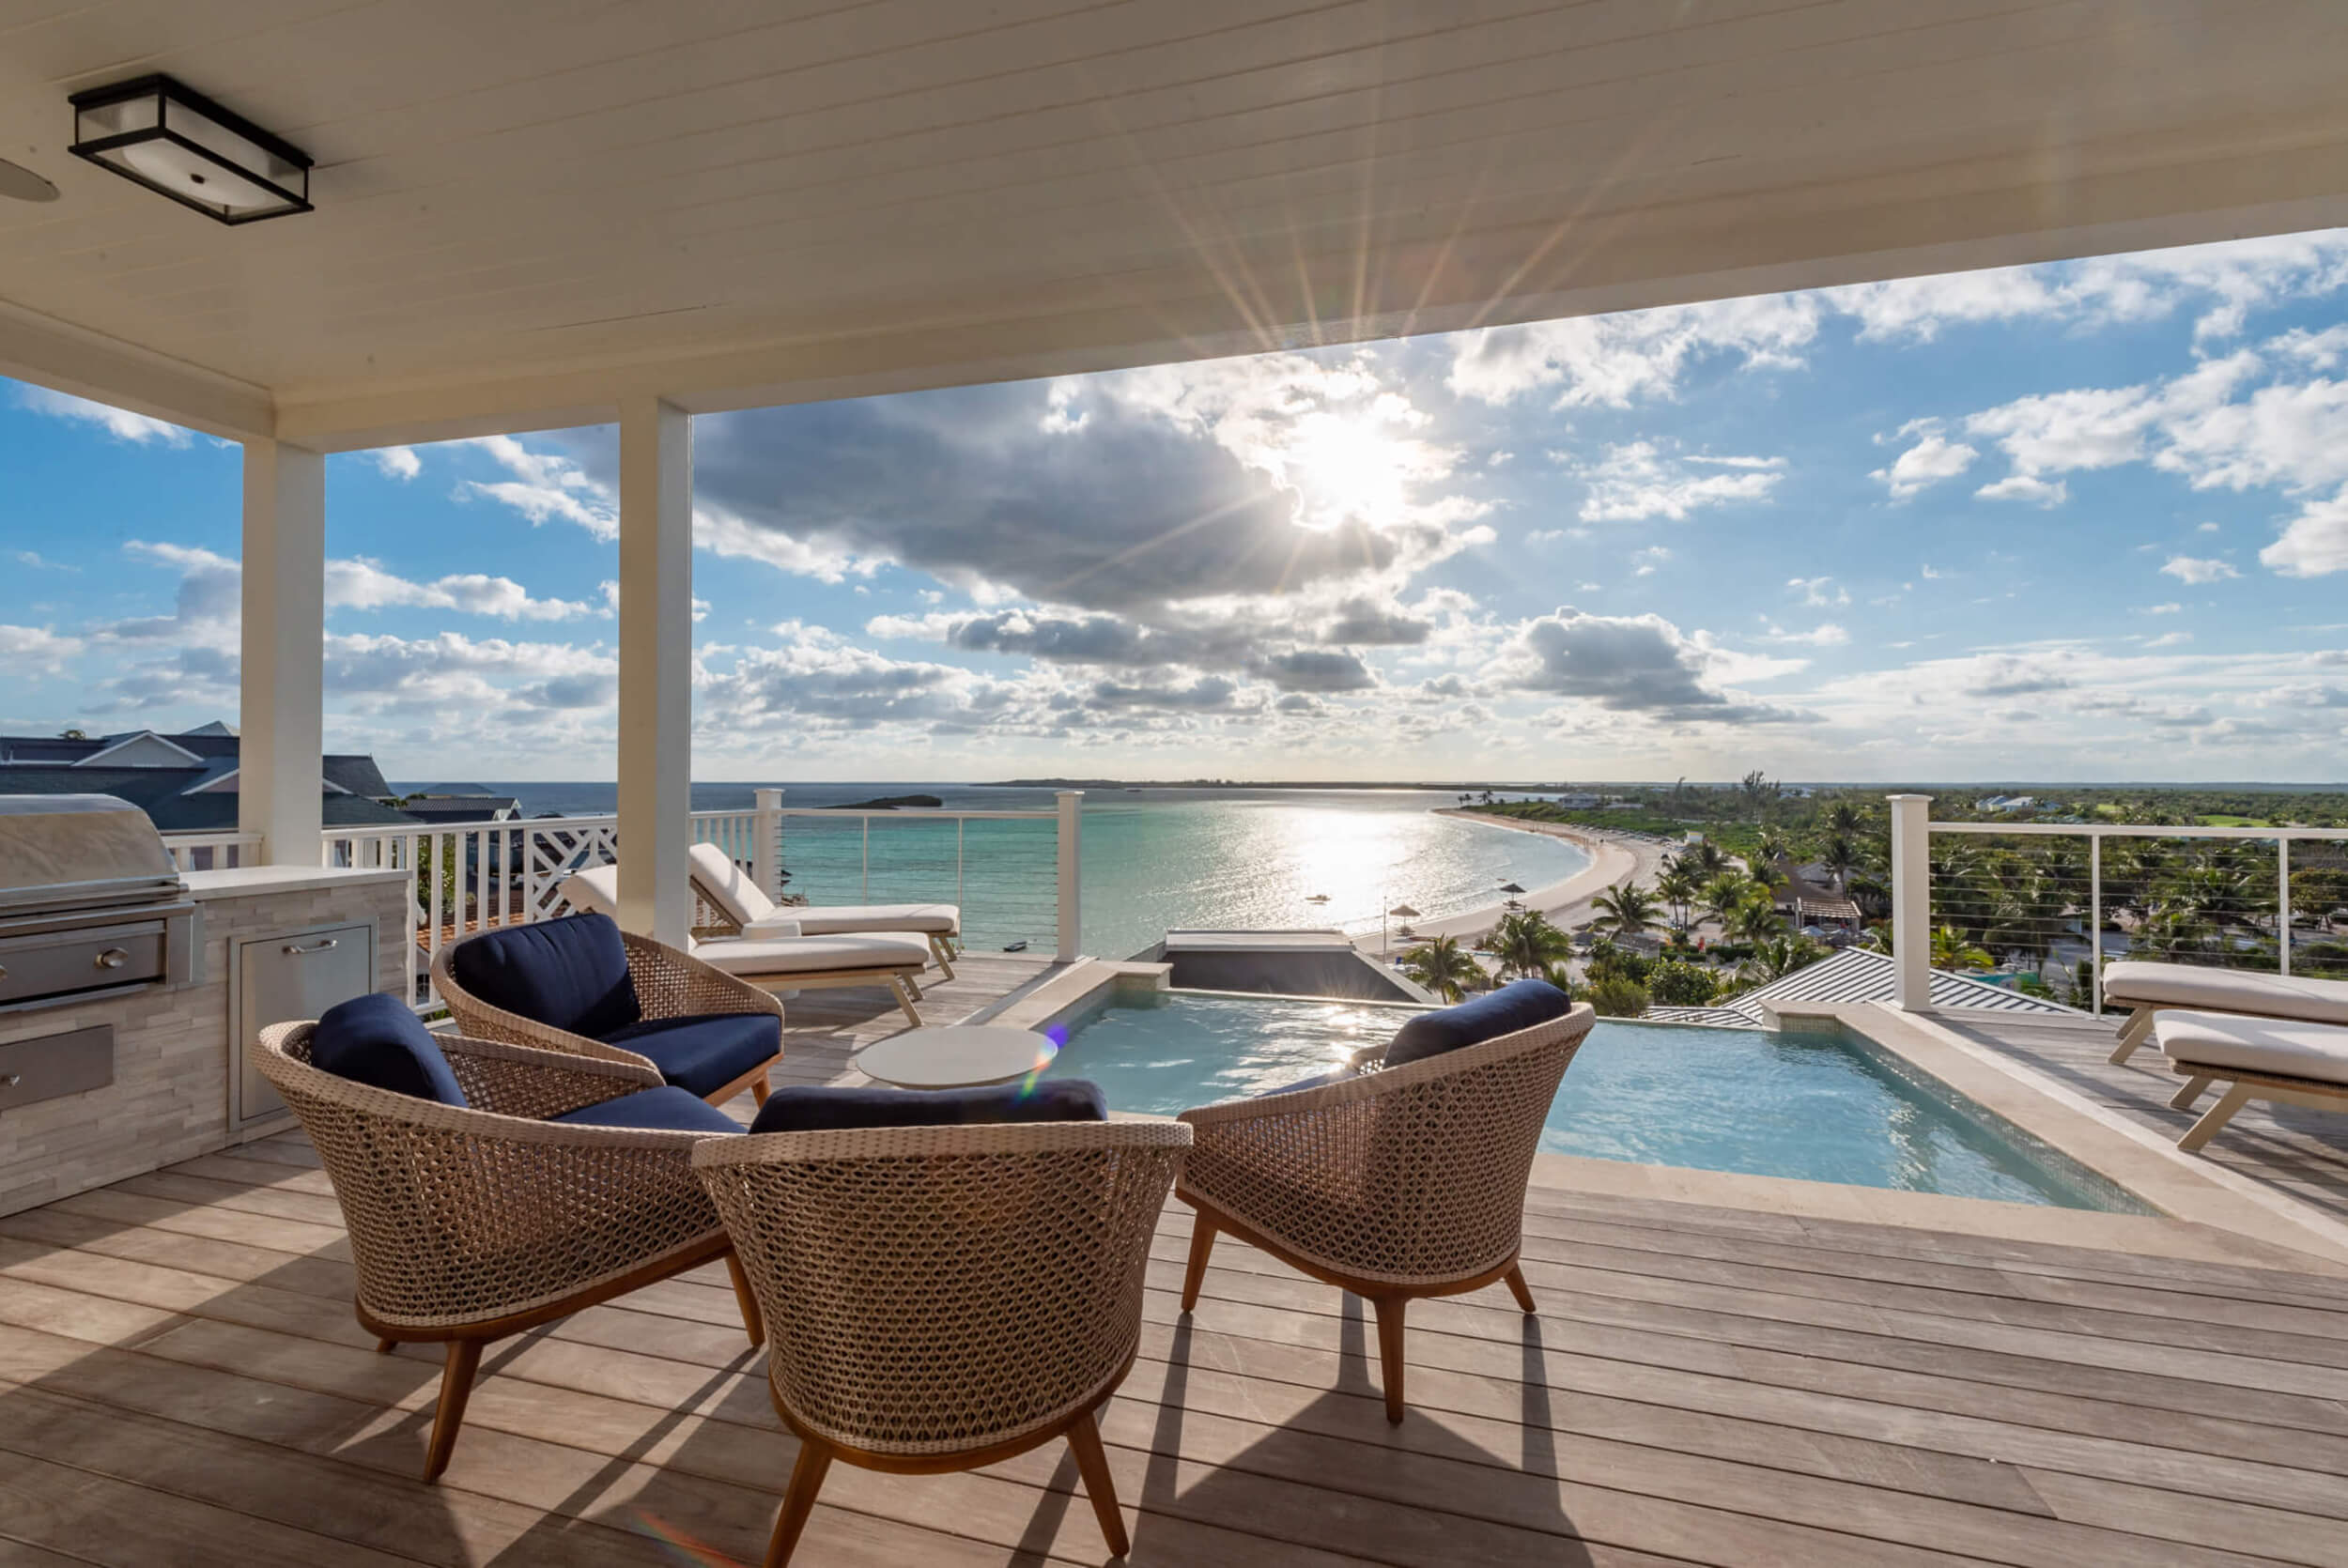 View from a house in The Ridge neighborhood at The Abaco Club